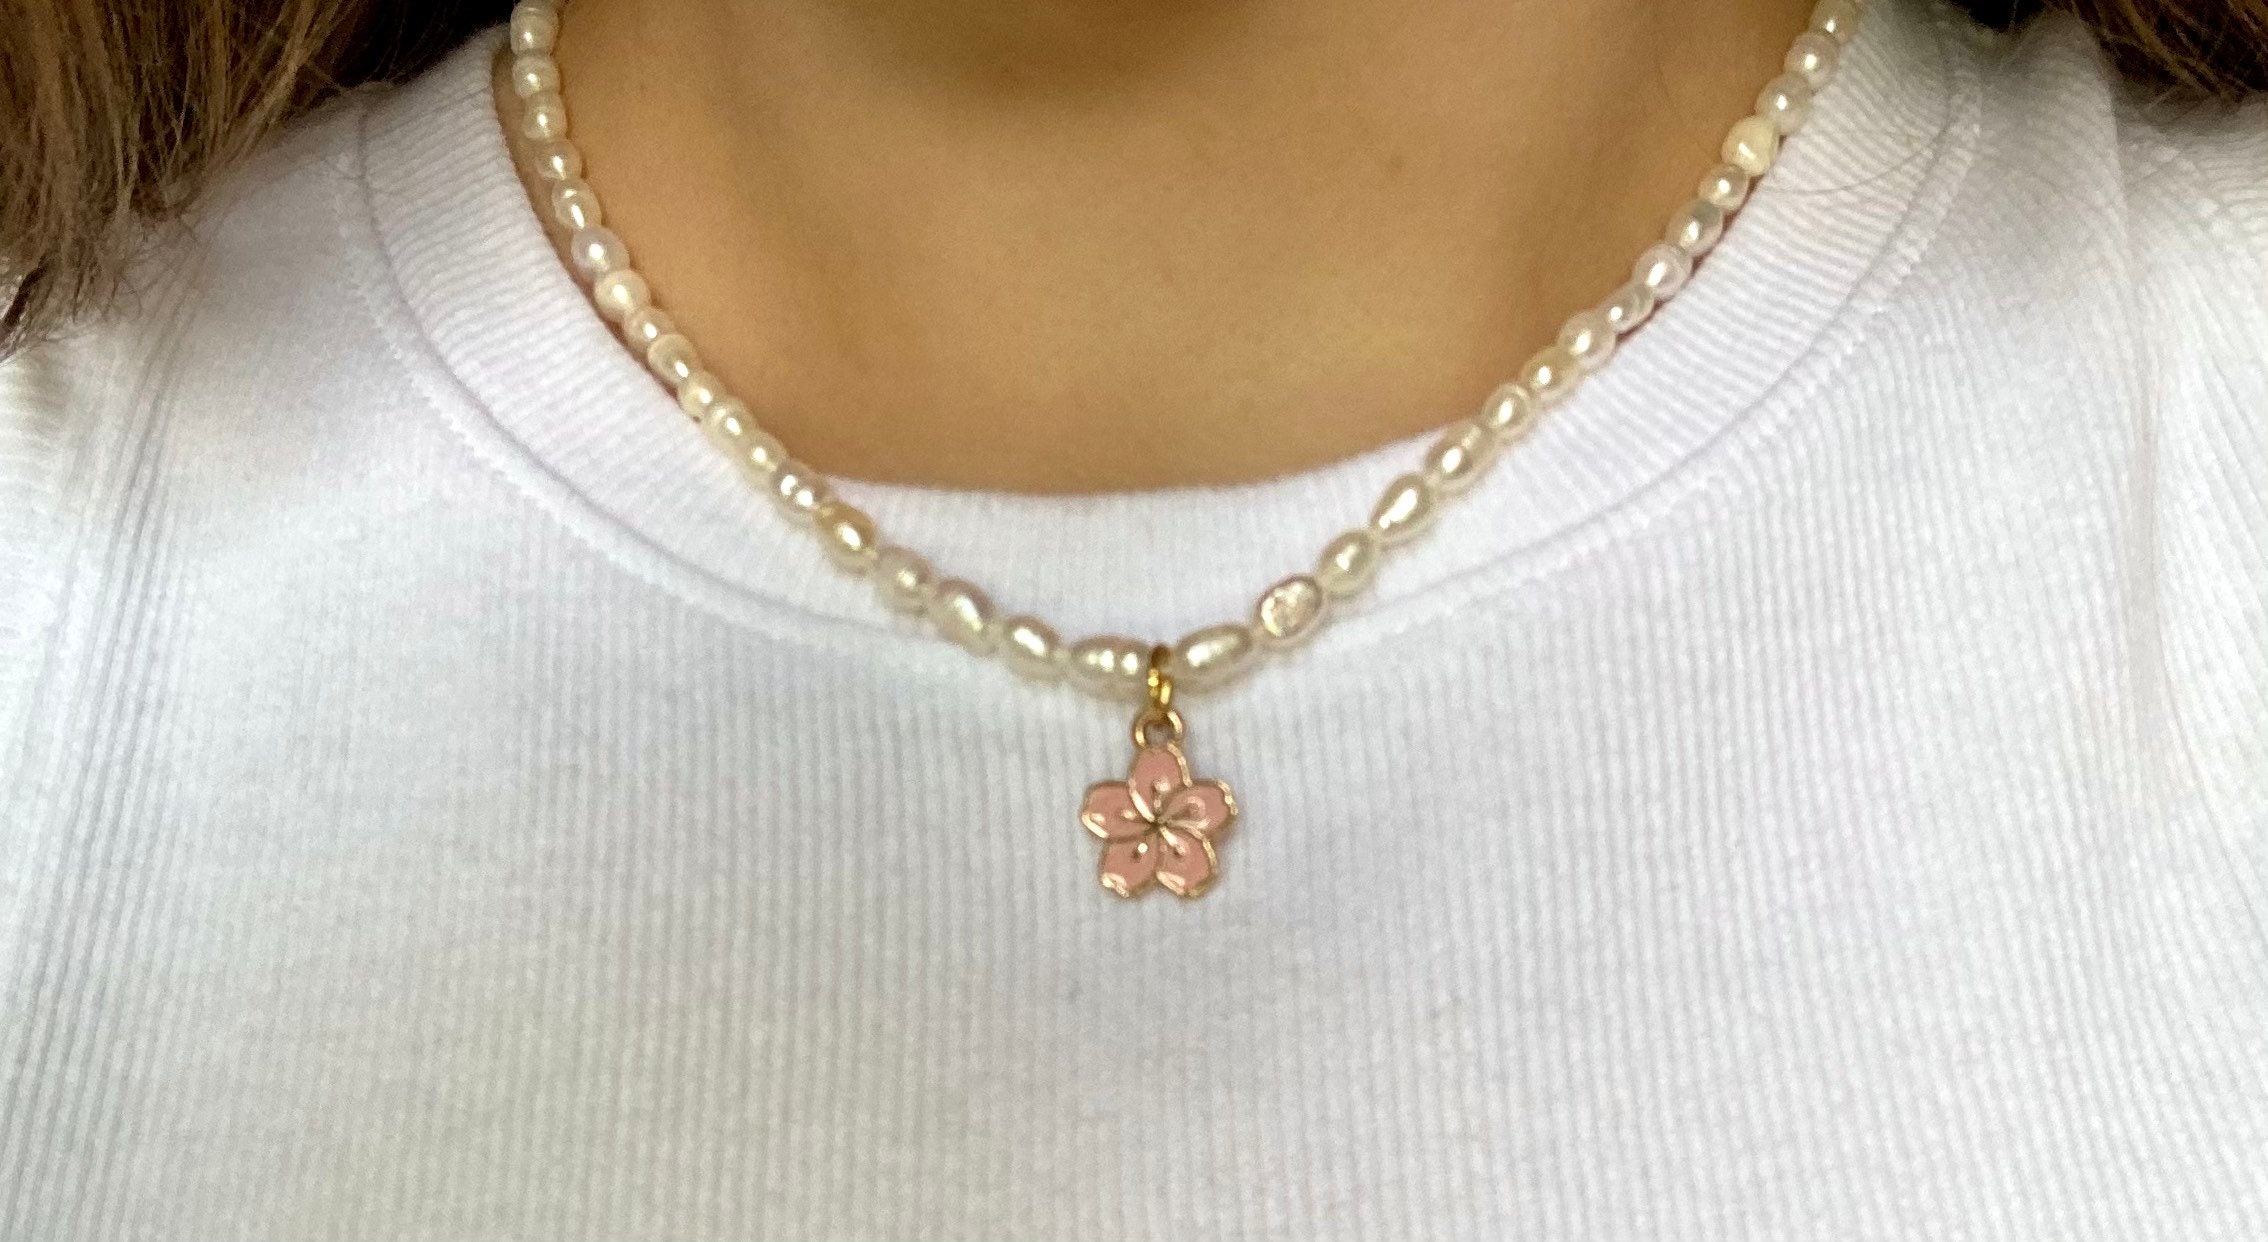  YOUMIYA ROSE Gold Cherry Blossoms Necklace For Graduation and  Mother's Day gifts Pink beautiful Artificial stone crystal Necklace Best  Gifts For Women Friend Lover : Clothing, Shoes & Jewelry